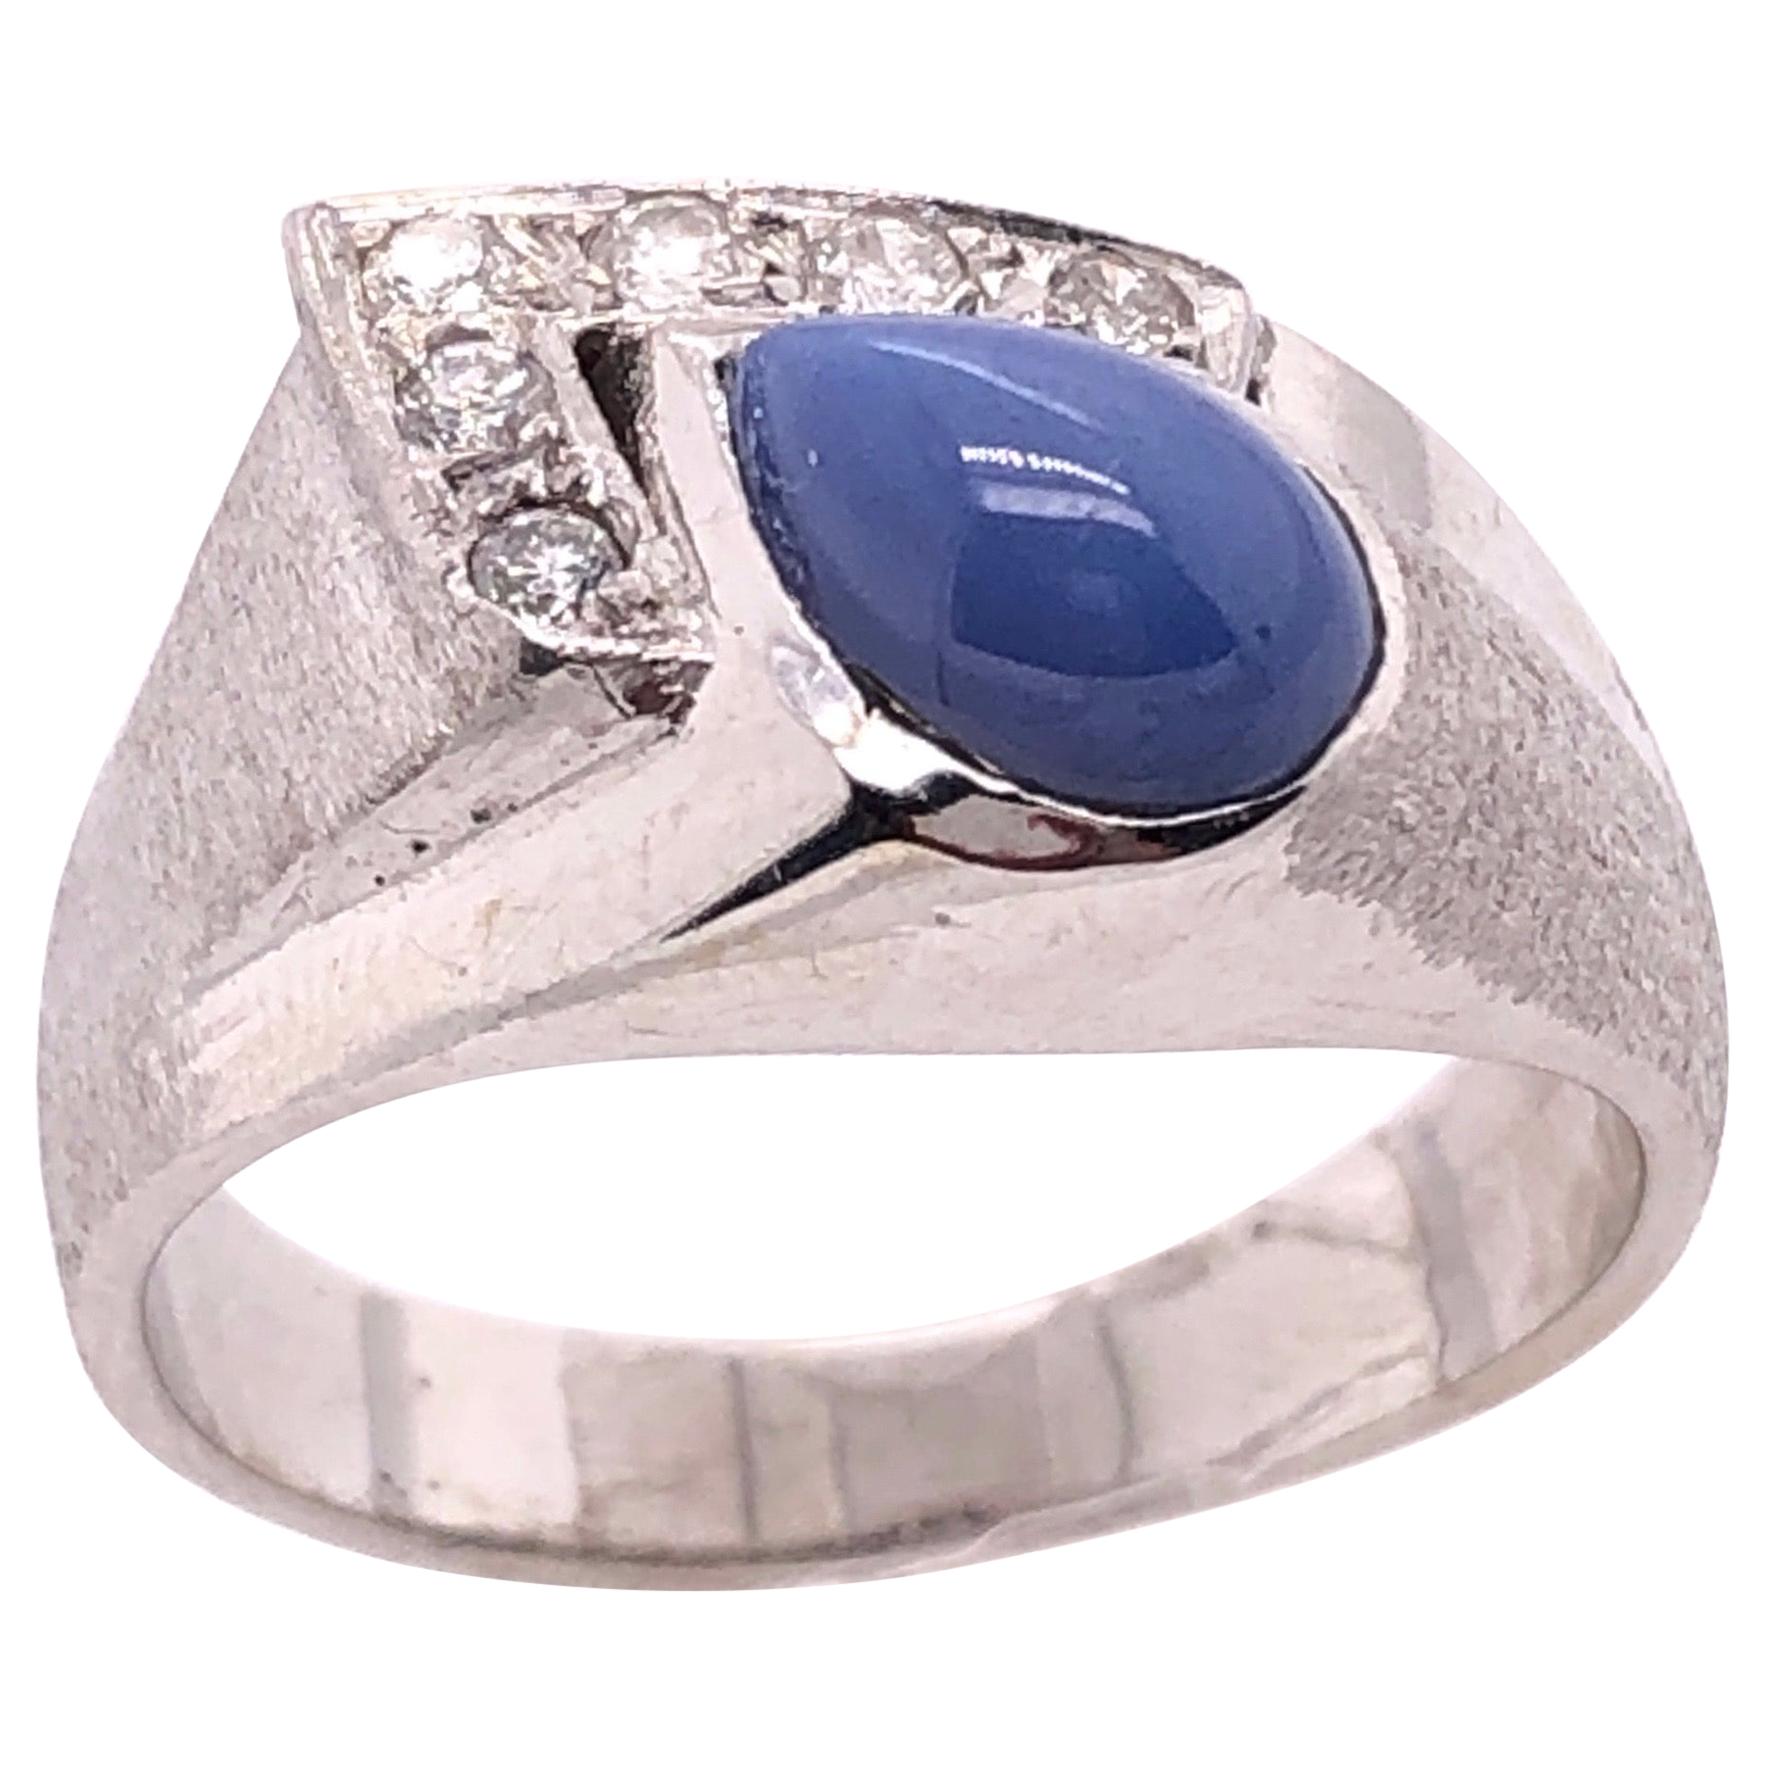 14 Karat White Gold With Teardrop Sapphire Cabochon Ring with Diamond Accents